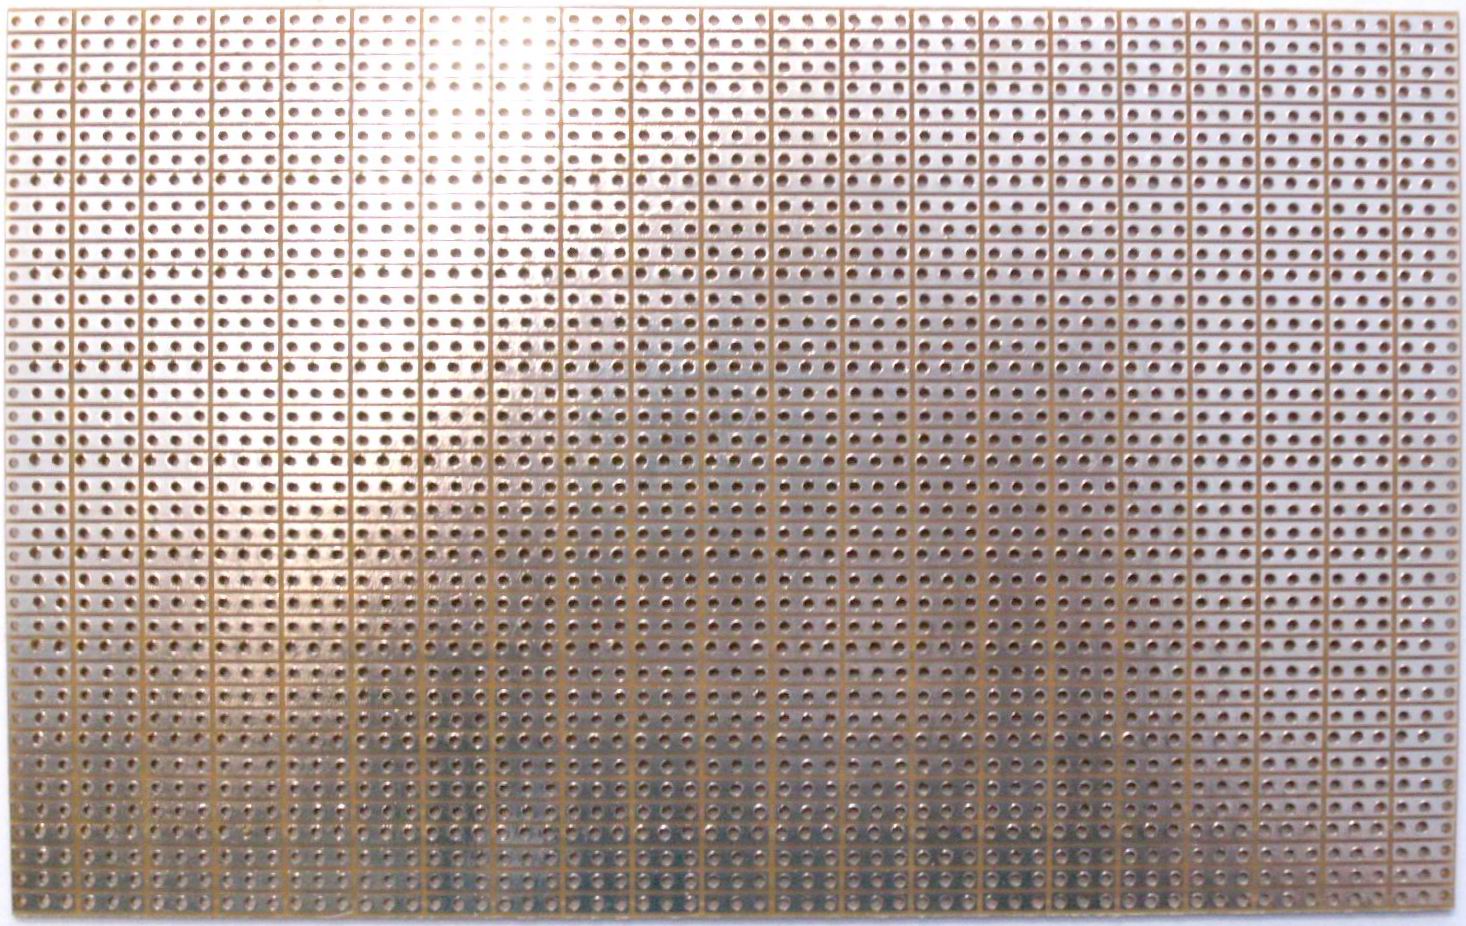 Kemo E013 Experimental Prototype Board with banks of 3 strips grid vero 160x100mm